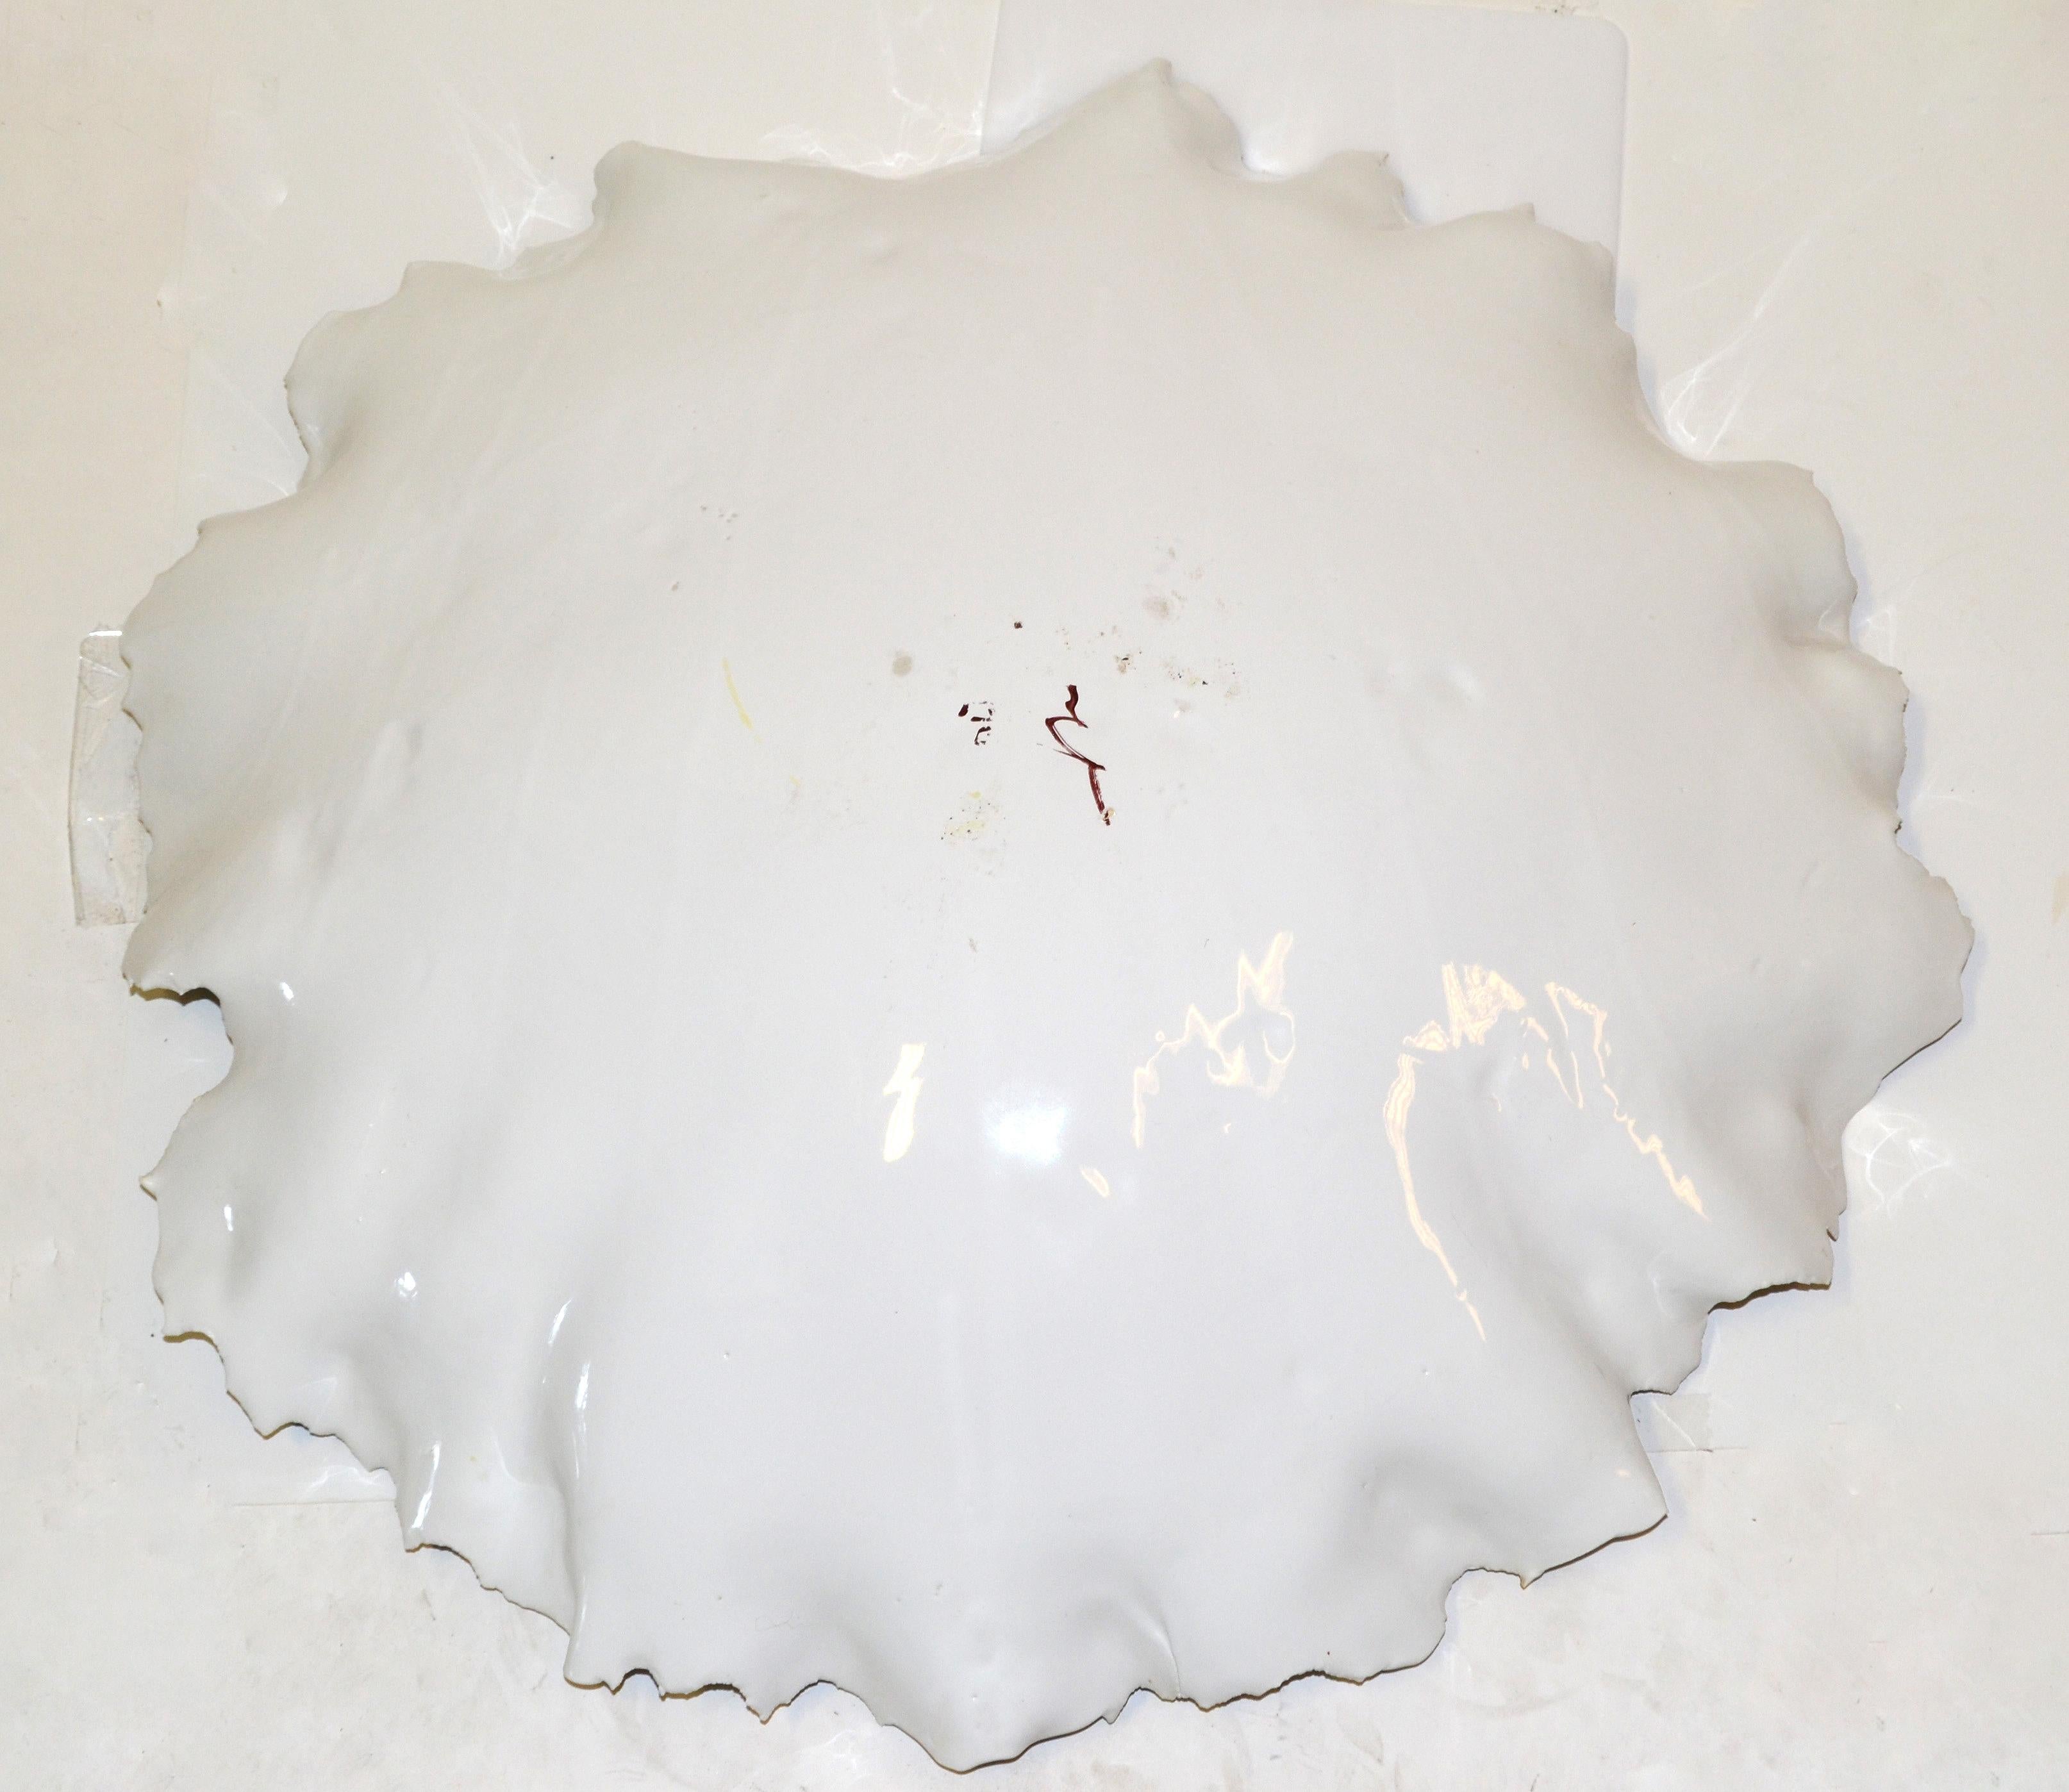 Signed Large Glazed Ceramic Seashell Bowl Centerpiece in White and Sand Color For Sale 4